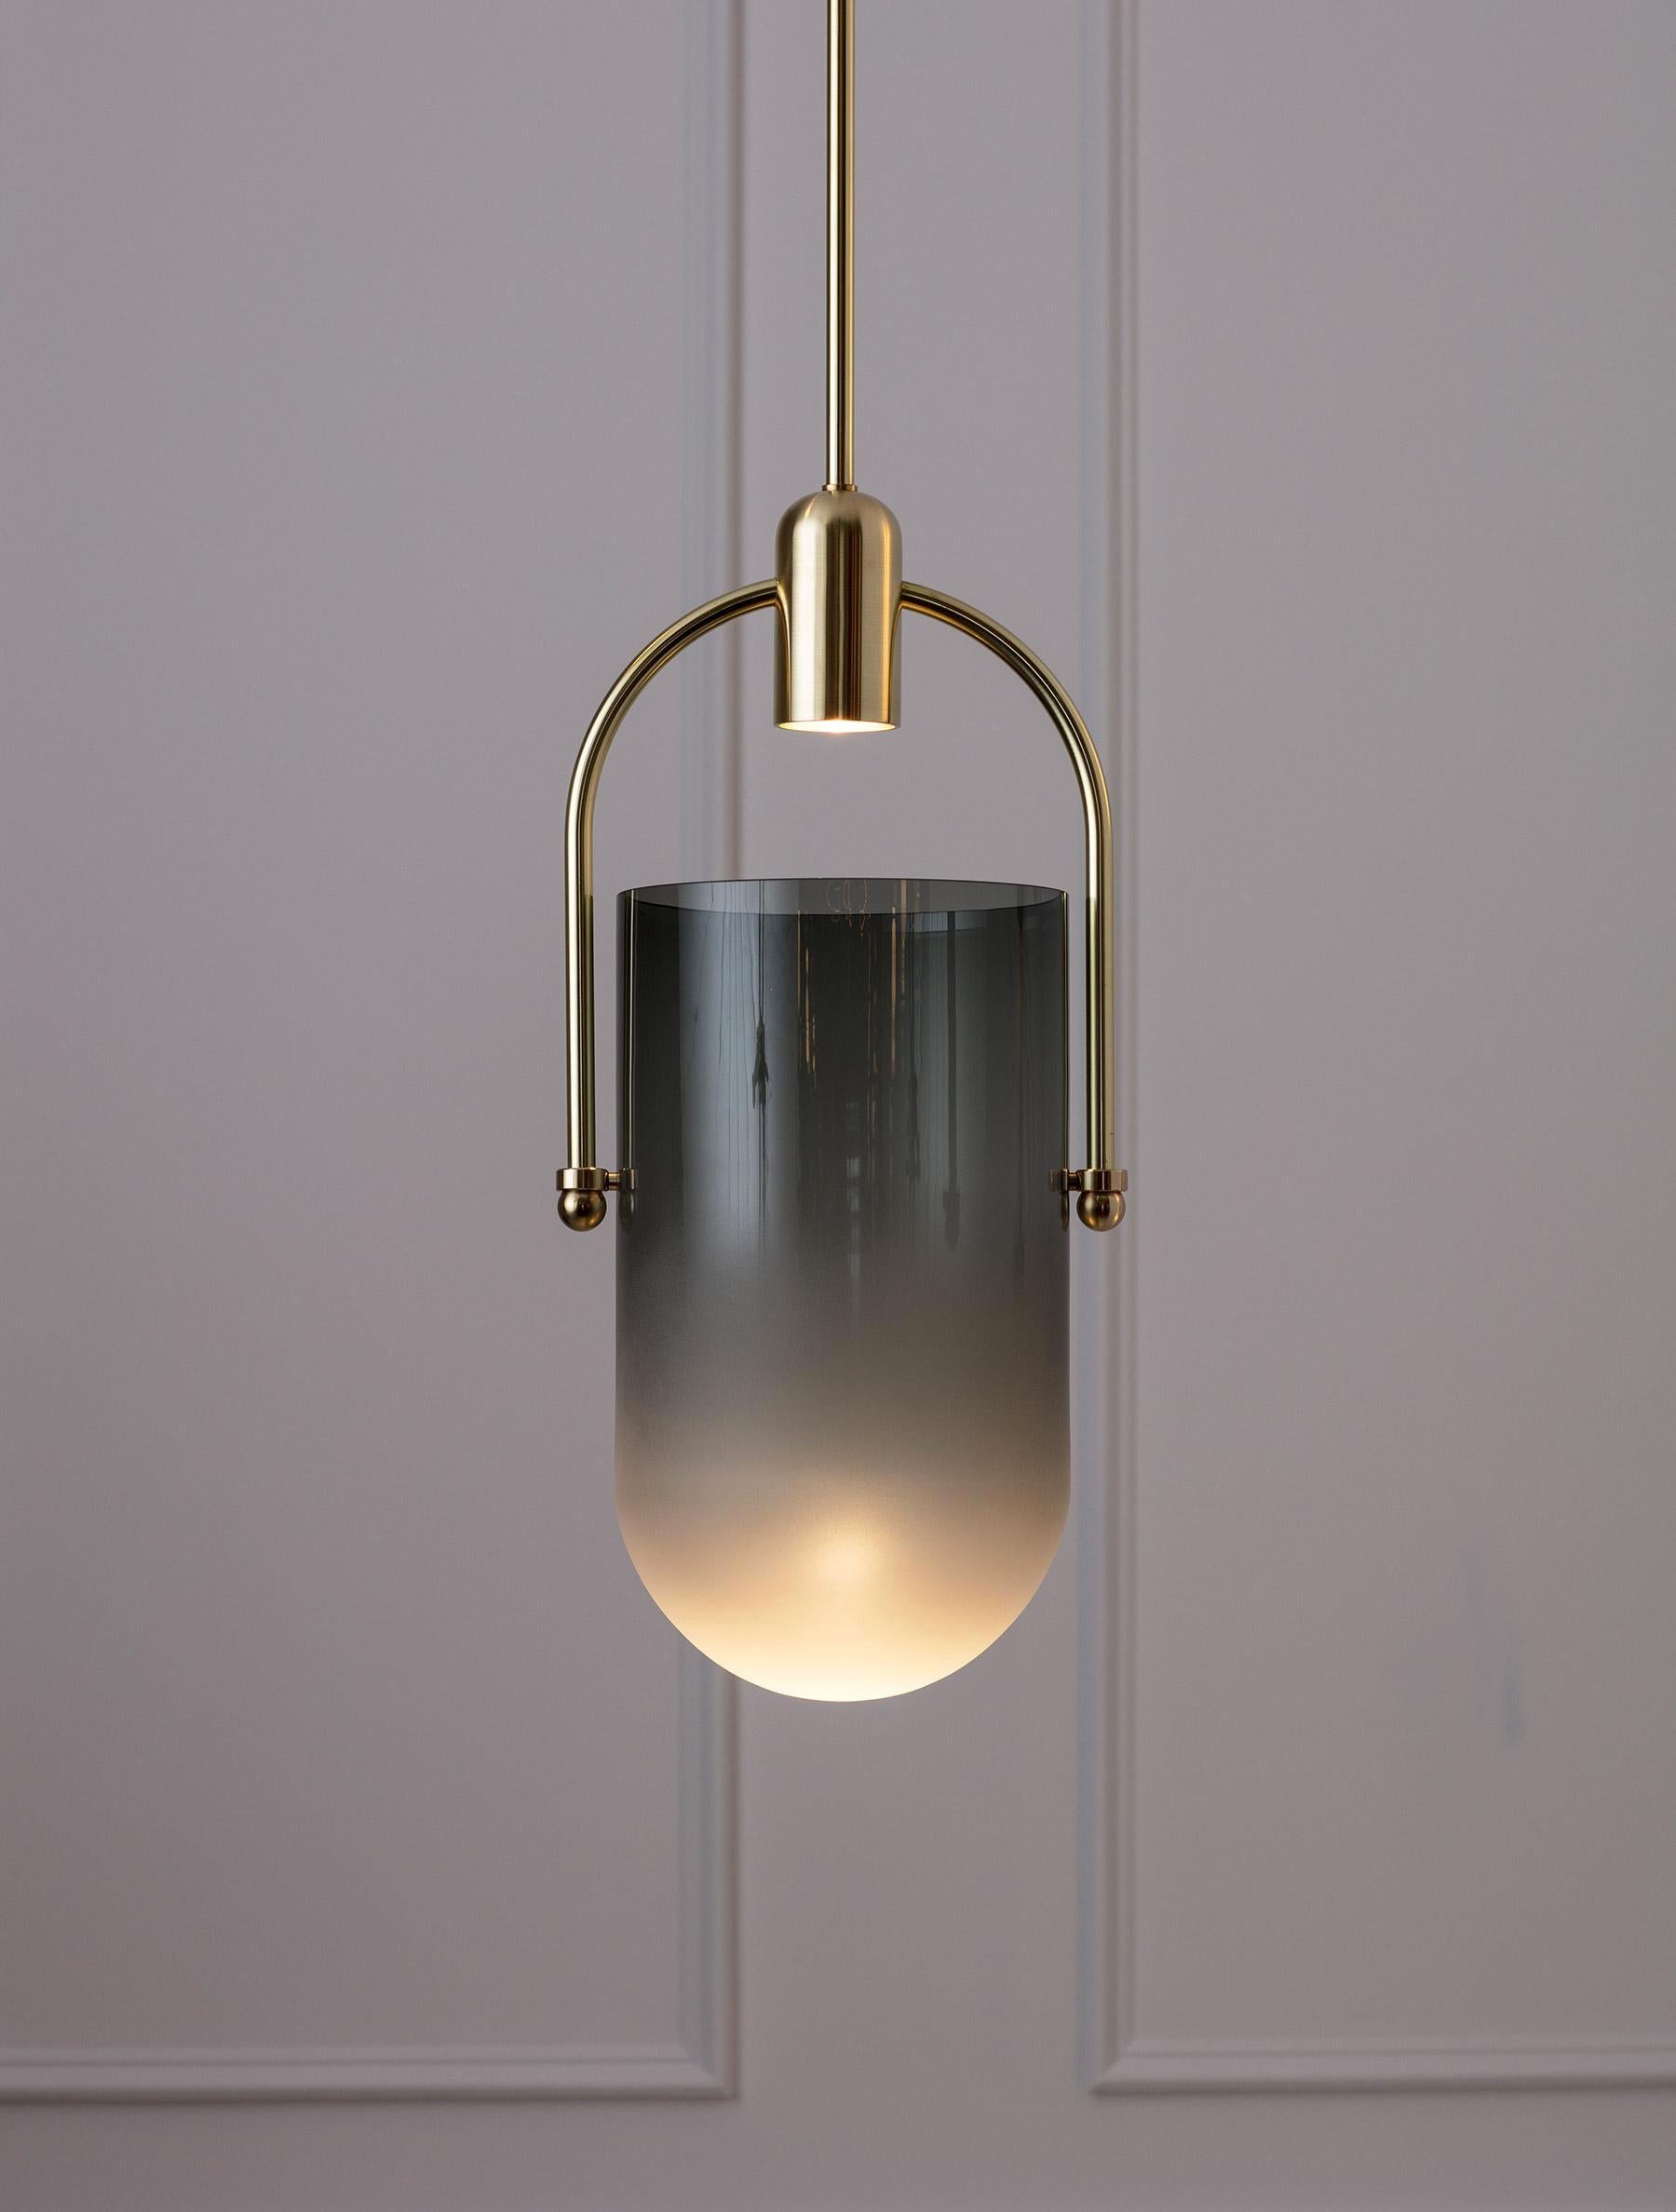  Modern Pendant Lamp in Brass and Glass by Allied Maker - Set of 3 pendant lamps.

The Arc Well pendant Lamp by Allied Maker  is the perfect marriage of materials, craftsmanship, and concept – These unique pendant lamps are created with modern brass